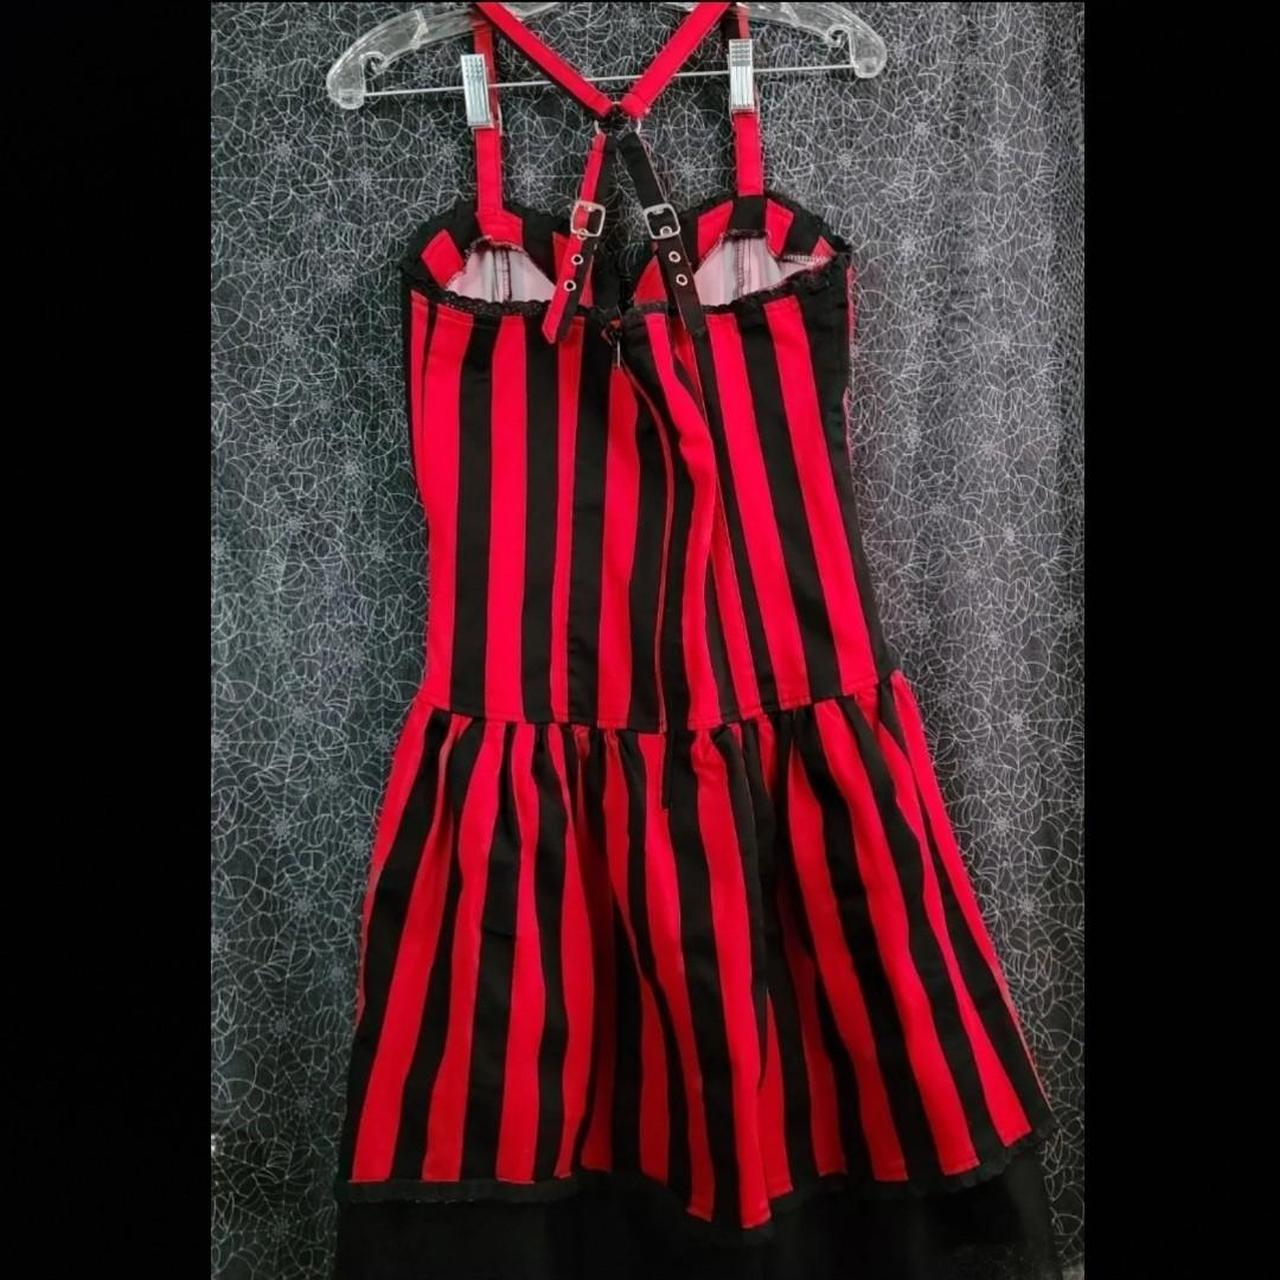 Hot Topic Women's Black and Red Dress (3)